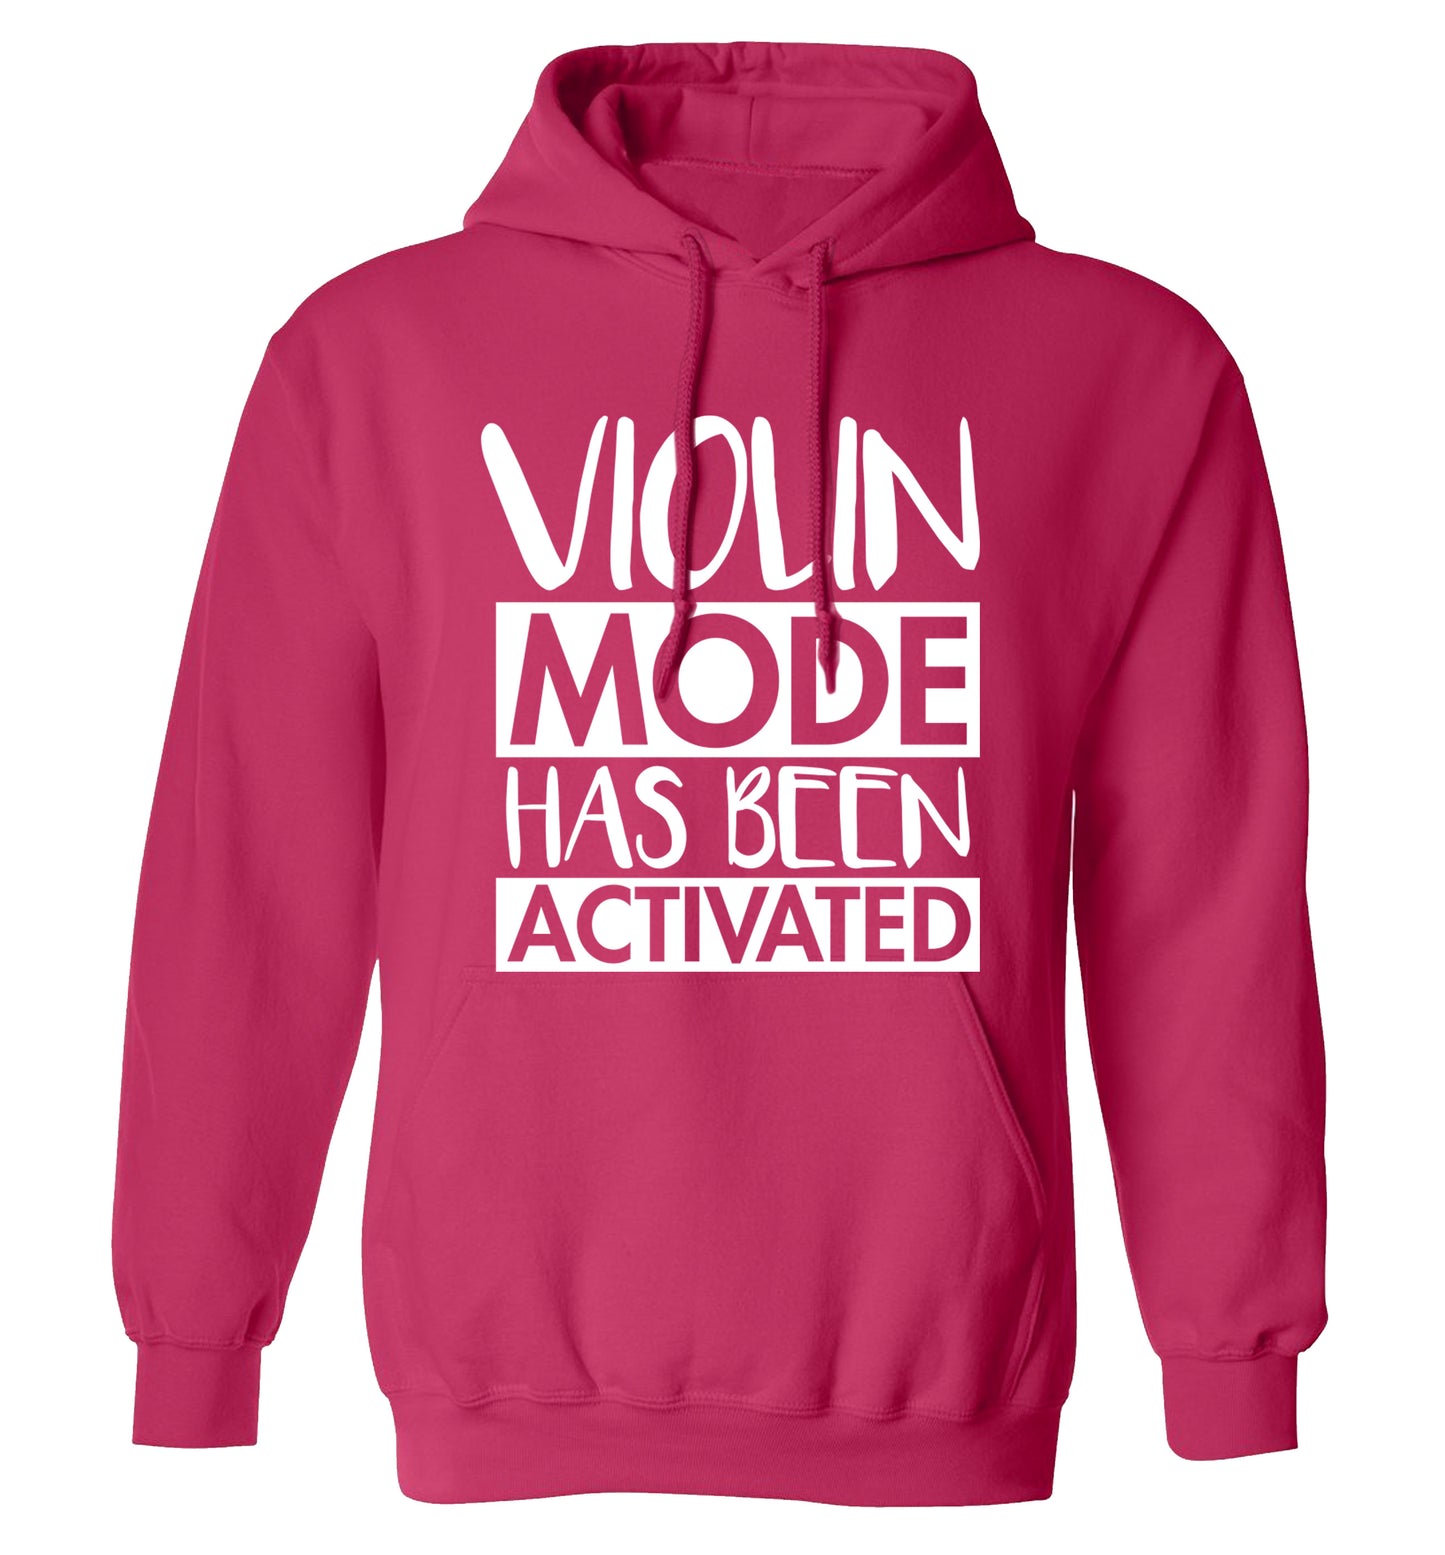 Violin Mode Activated adults unisex pink hoodie 2XL